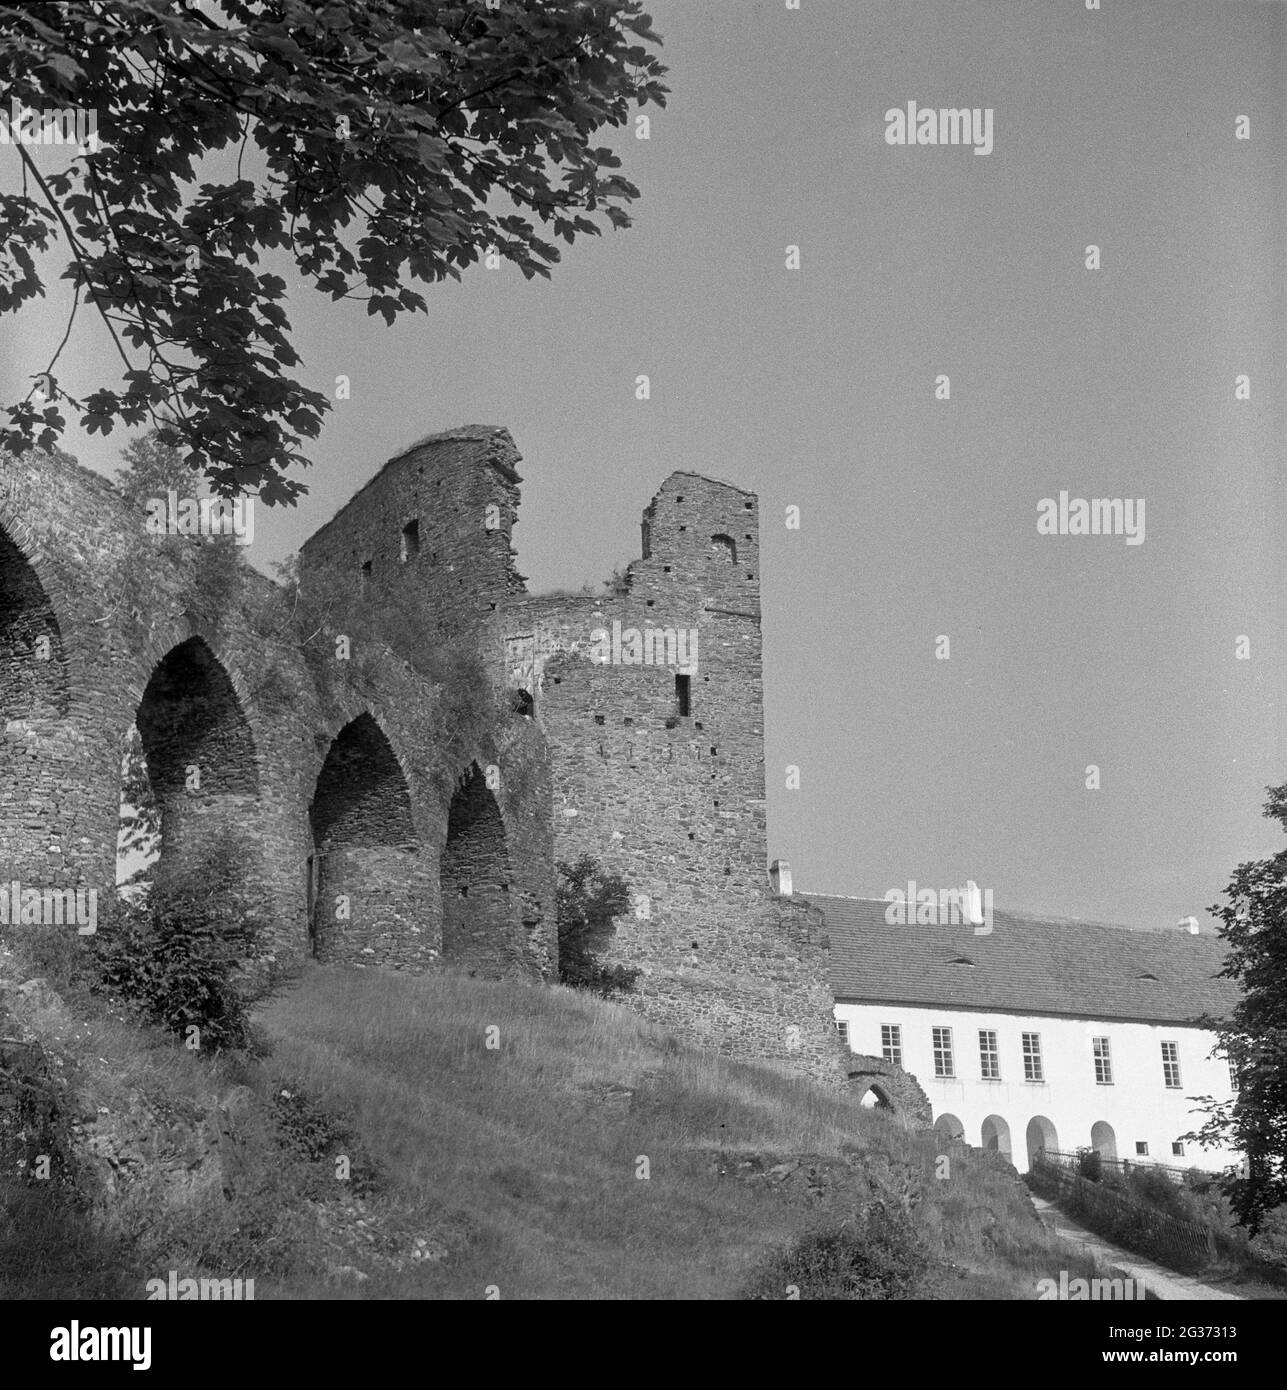 Medieval castle of Velhartice (Welhartitz) with a massive stone bridge connecting its parts. Southern Bohemia, Czechoslovakia, shot in early 1960s. Stock Photo